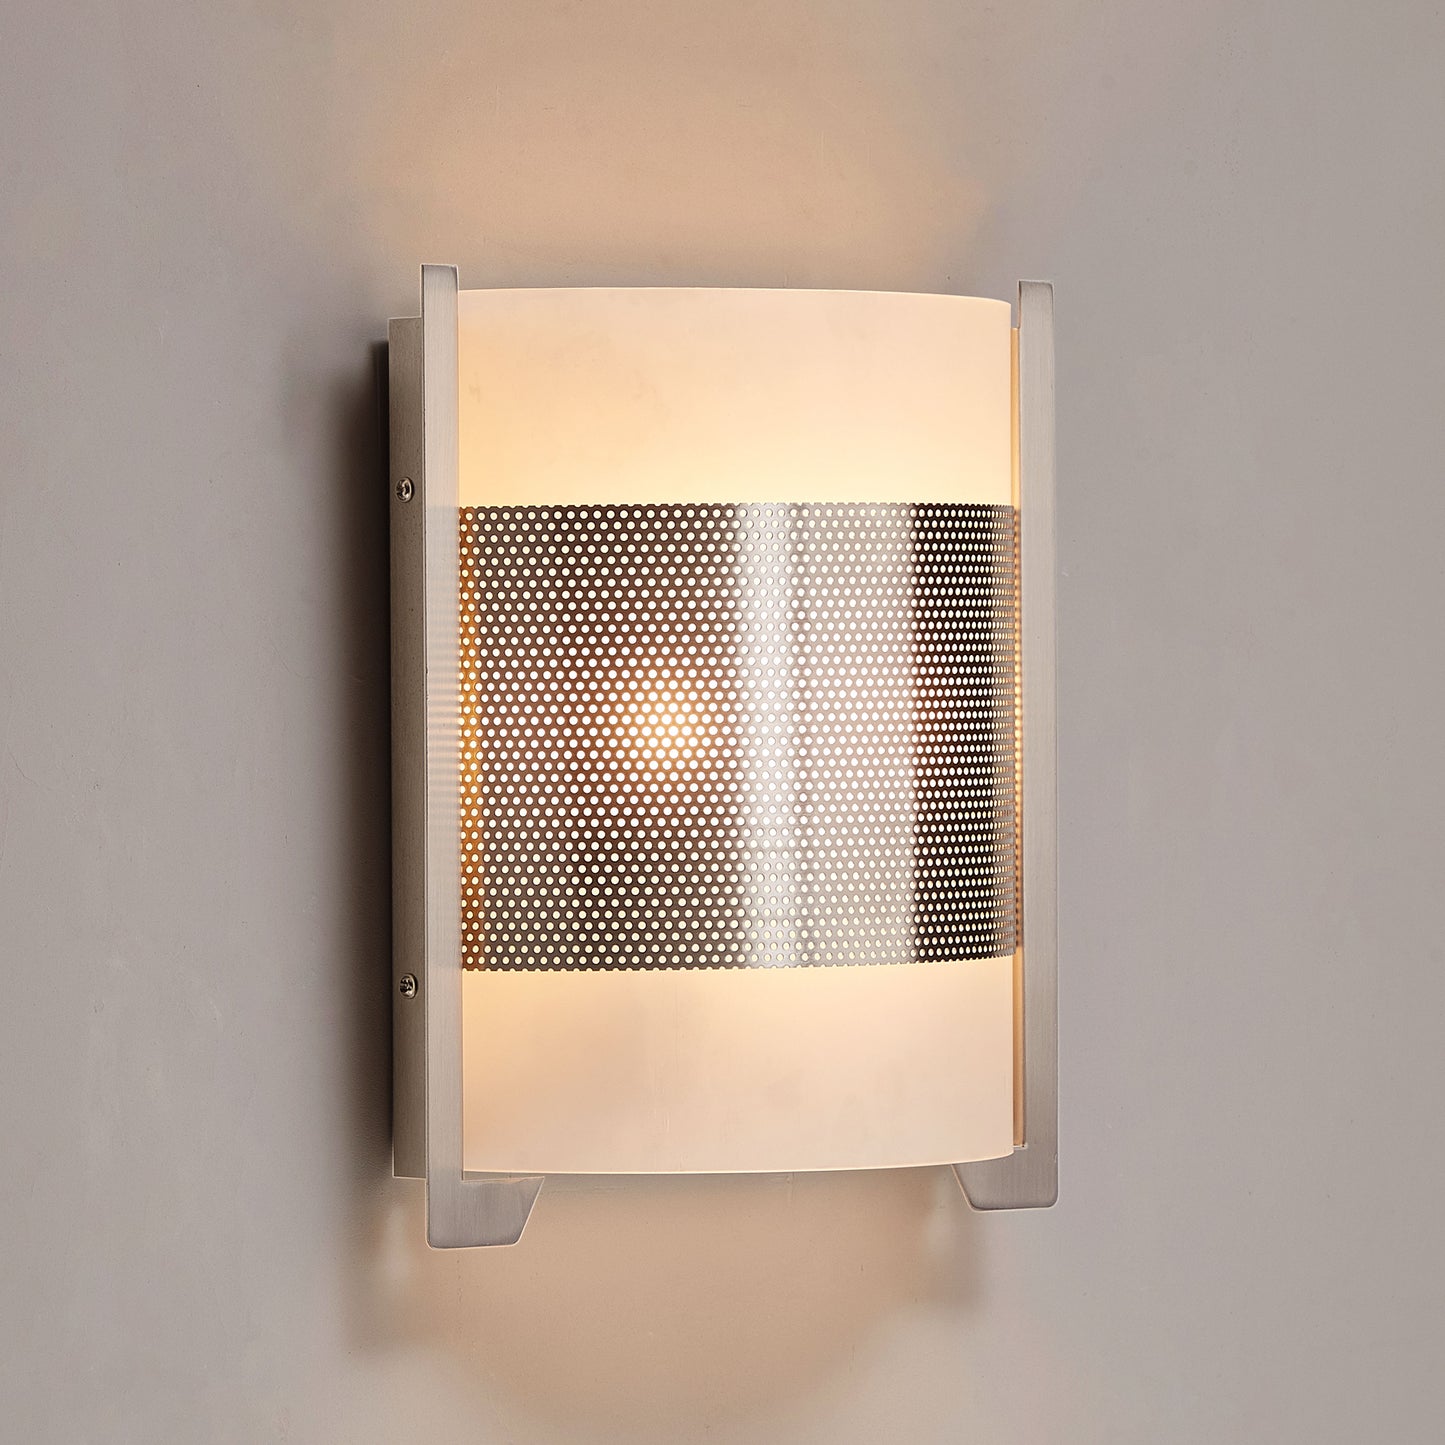 2-light-brushed-nickel-wall-sconce-with-switch